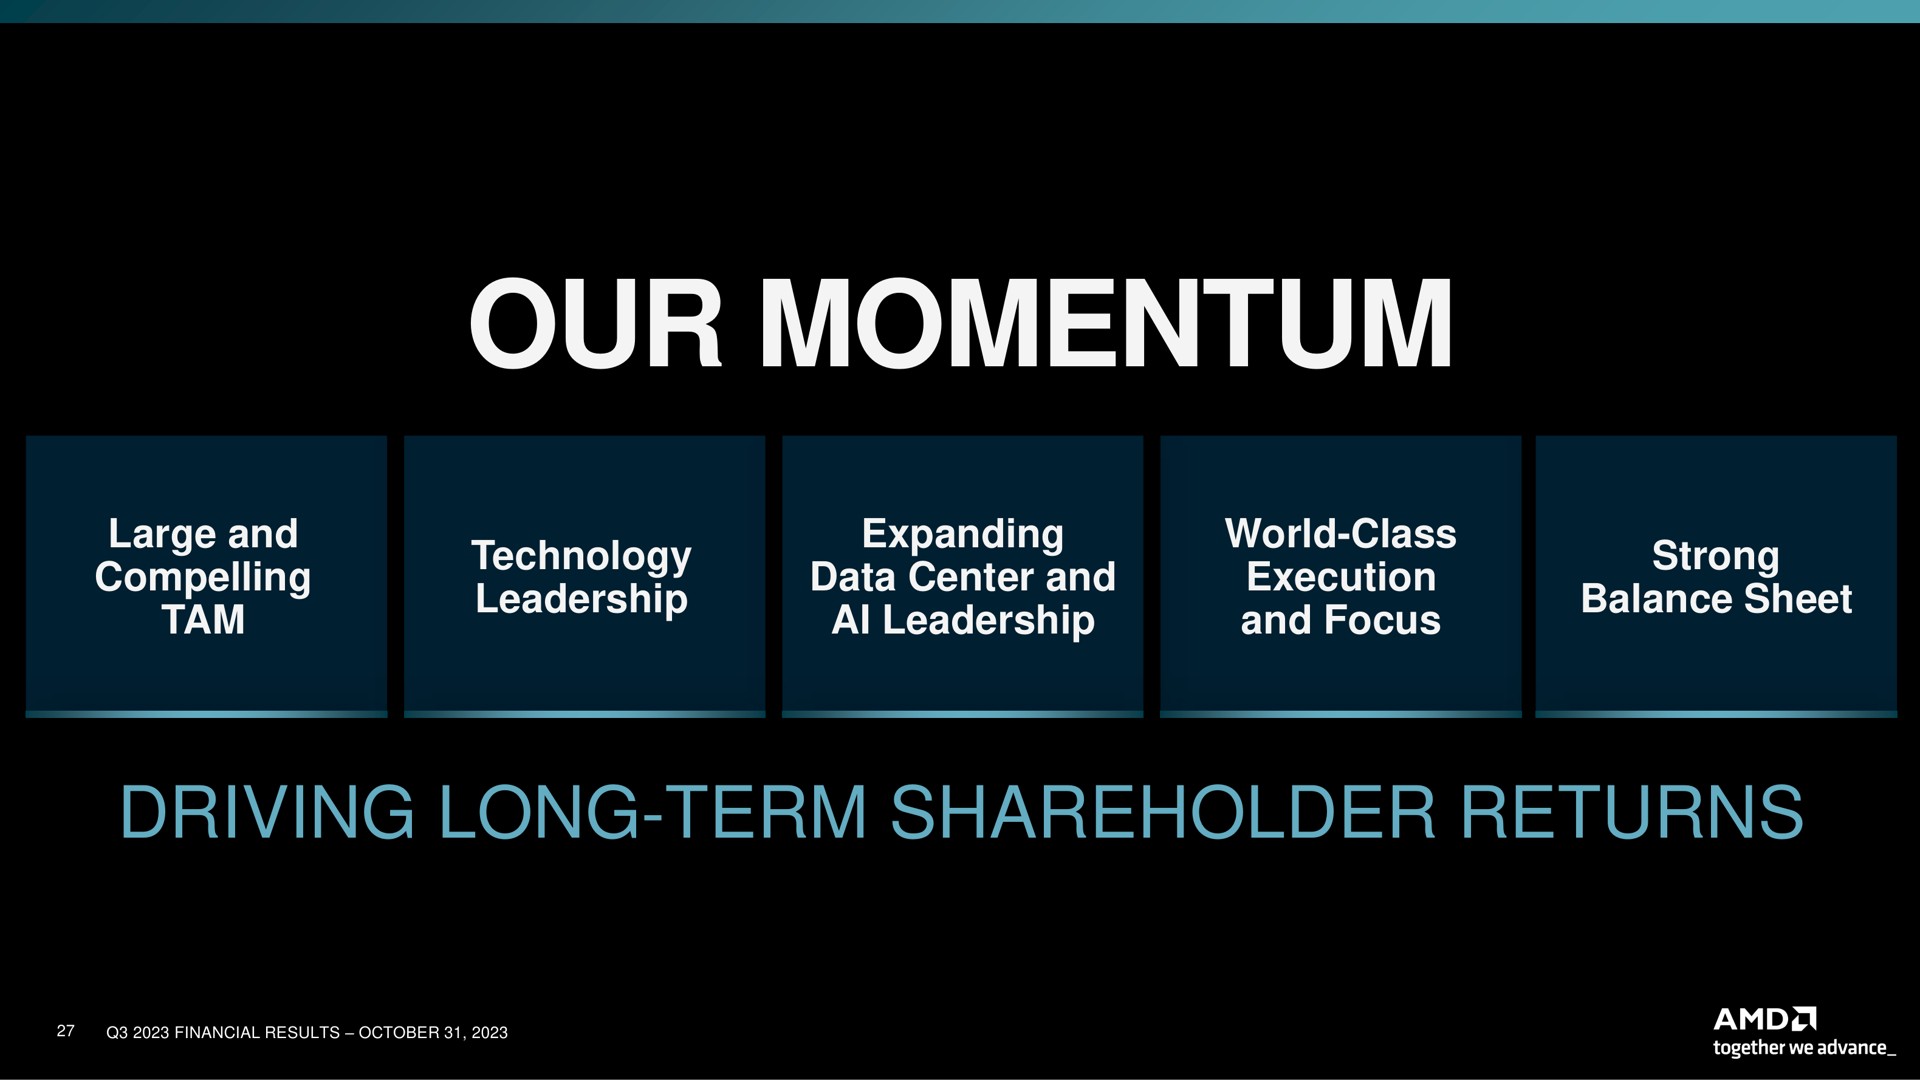 our momentum large and compelling tam technology leadership expanding data center and leadership world class execution and focus strong balance sheet driving long term shareholder returns | AMD